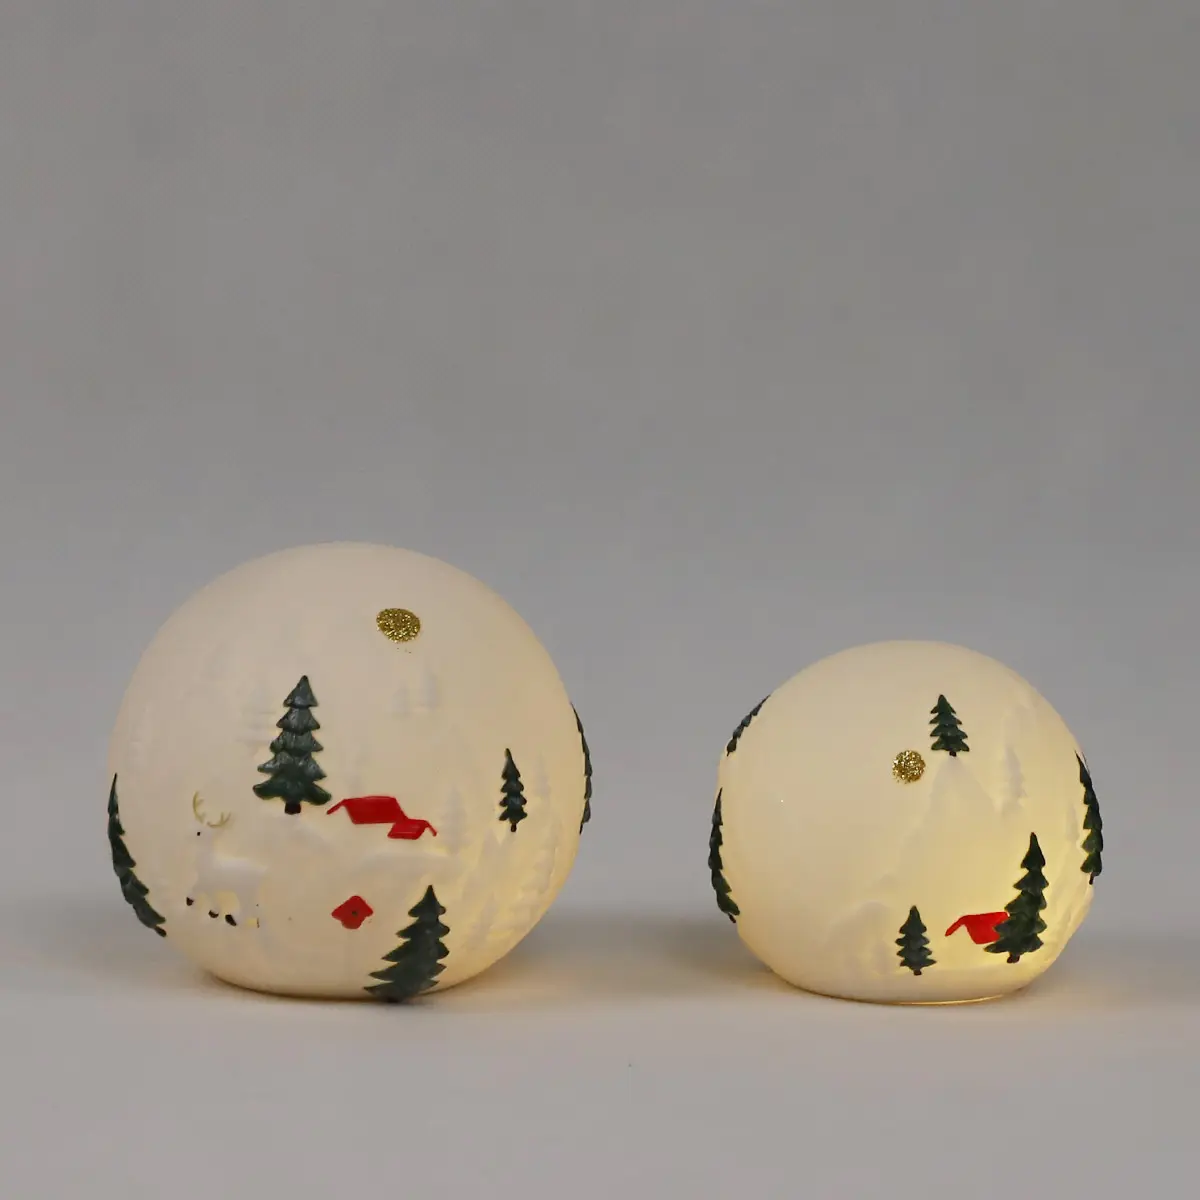 Wholesale DIY Ceramic Decorating Christmas Ball Ornaments Production For Home Hotel Party